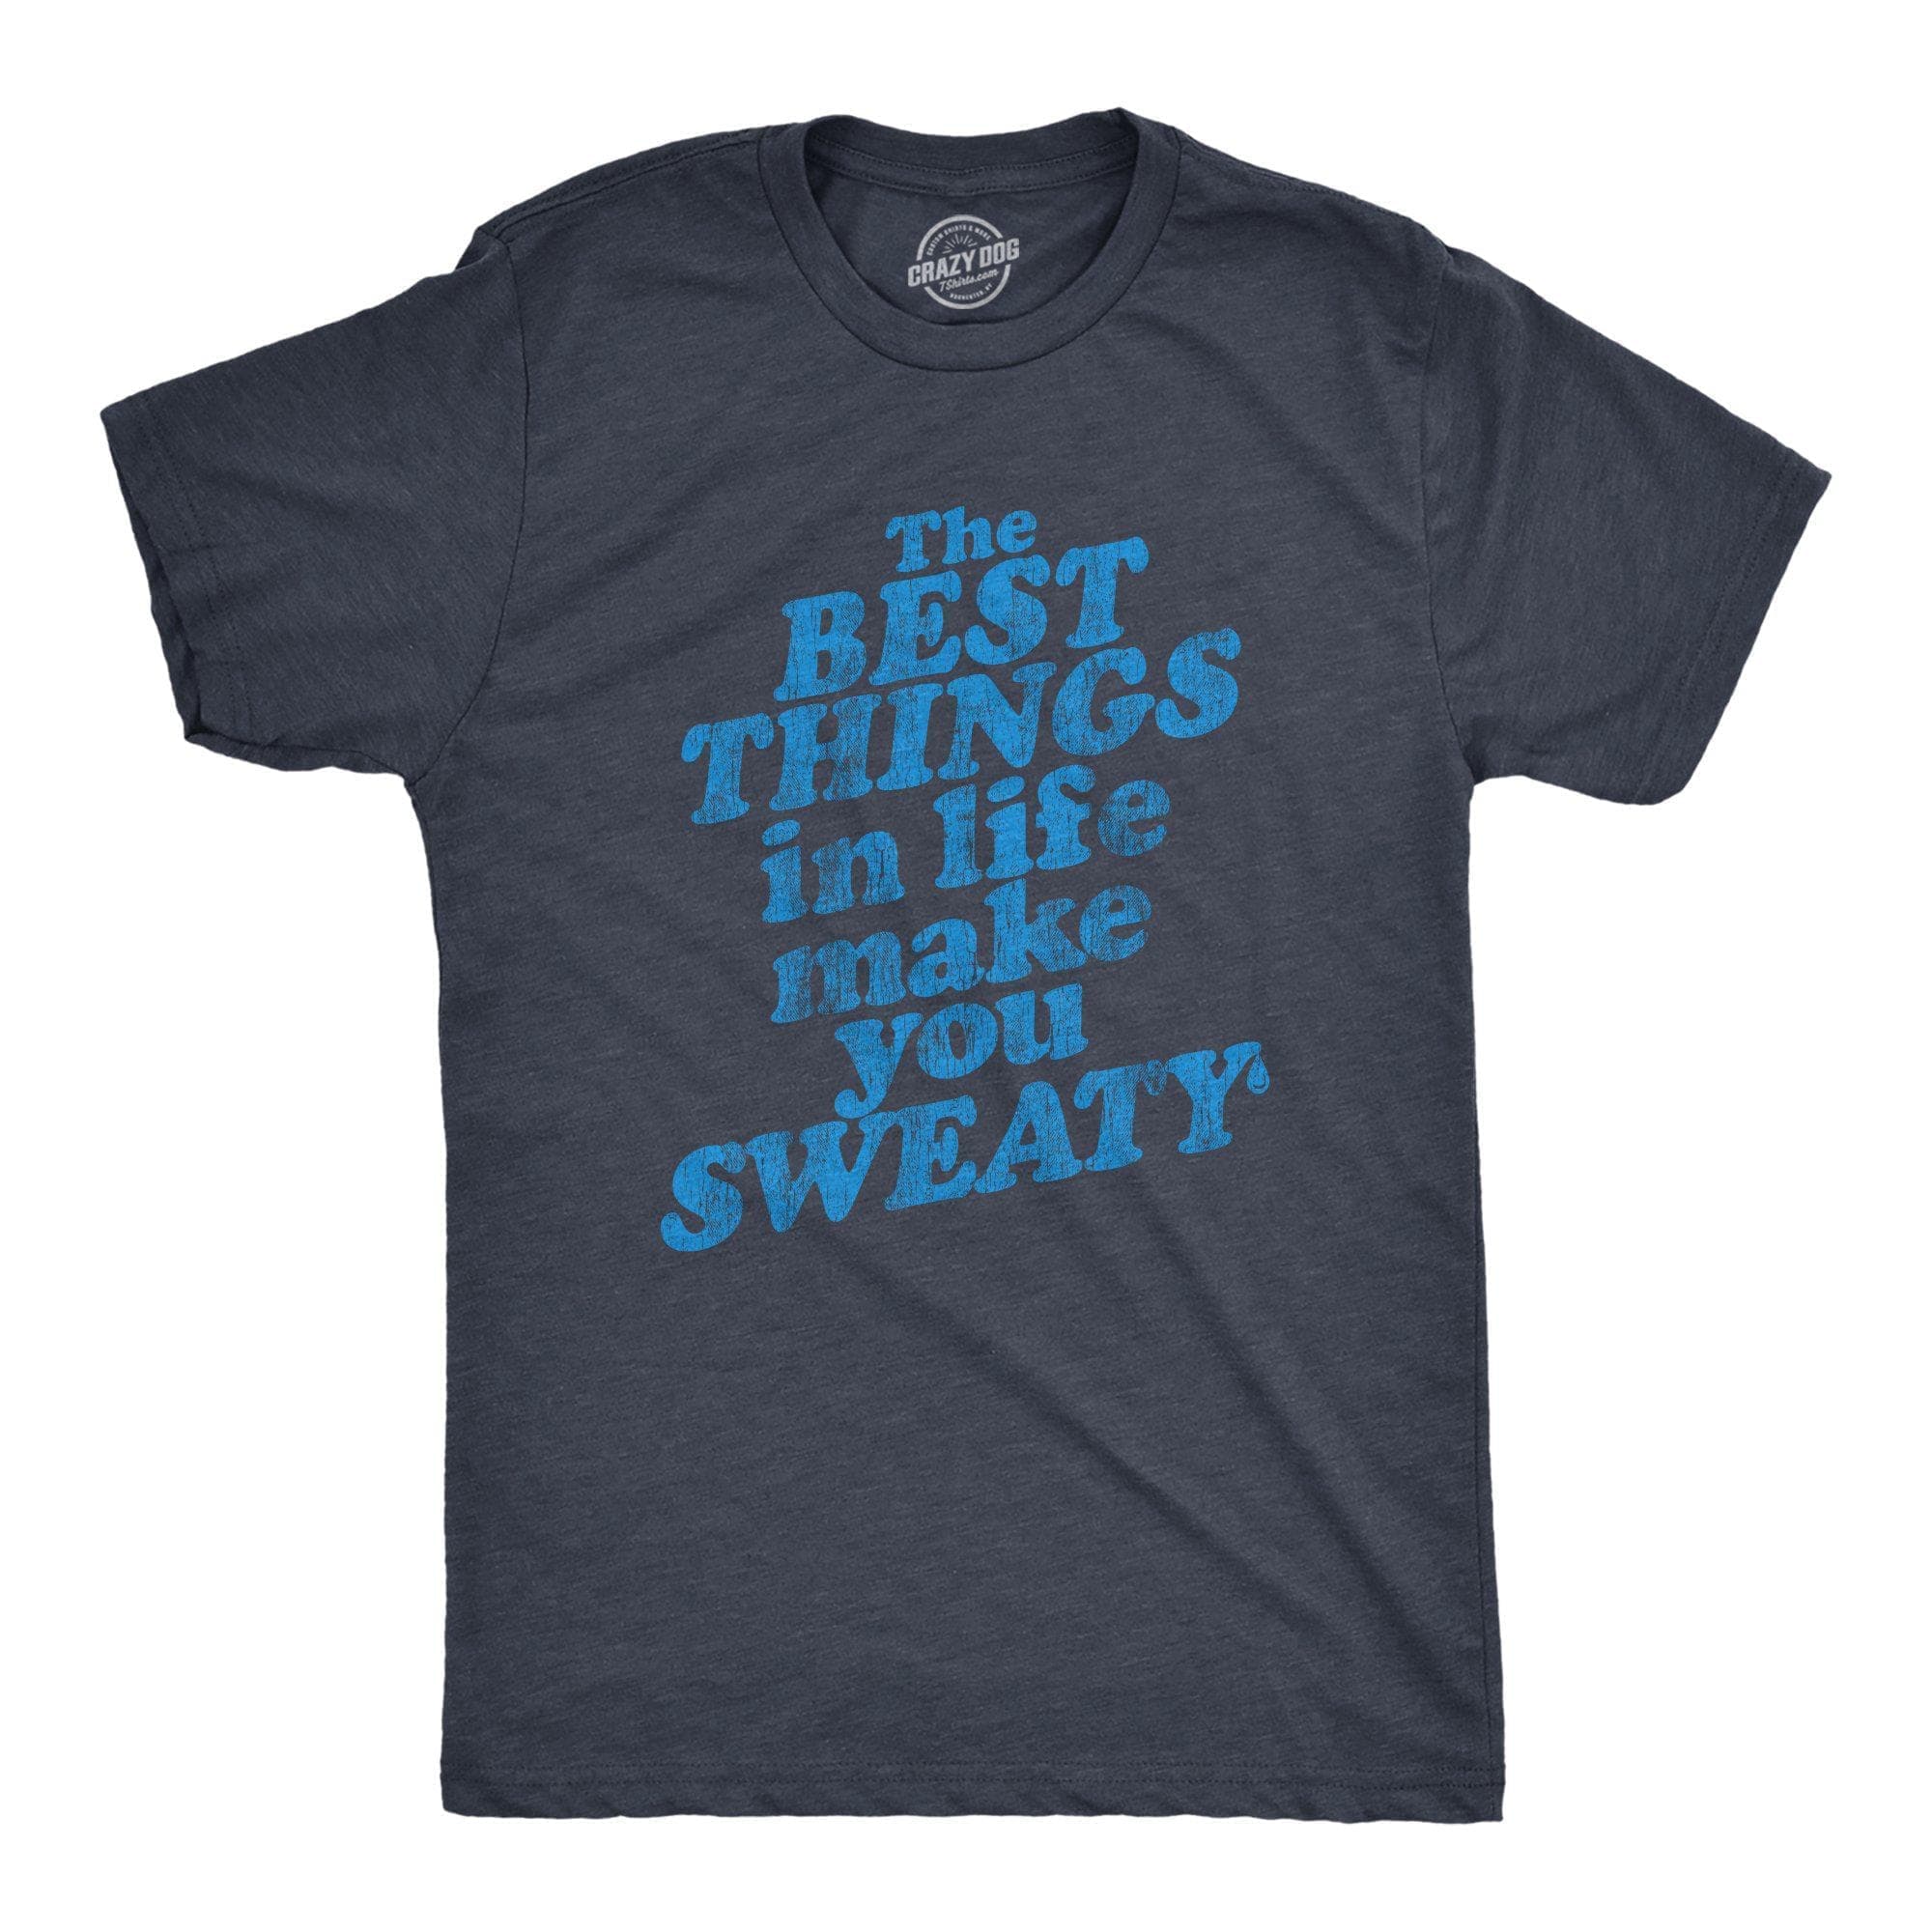 The Best Things In Life Make You Sweaty Men's Tshirt - Crazy Dog T-Shirts